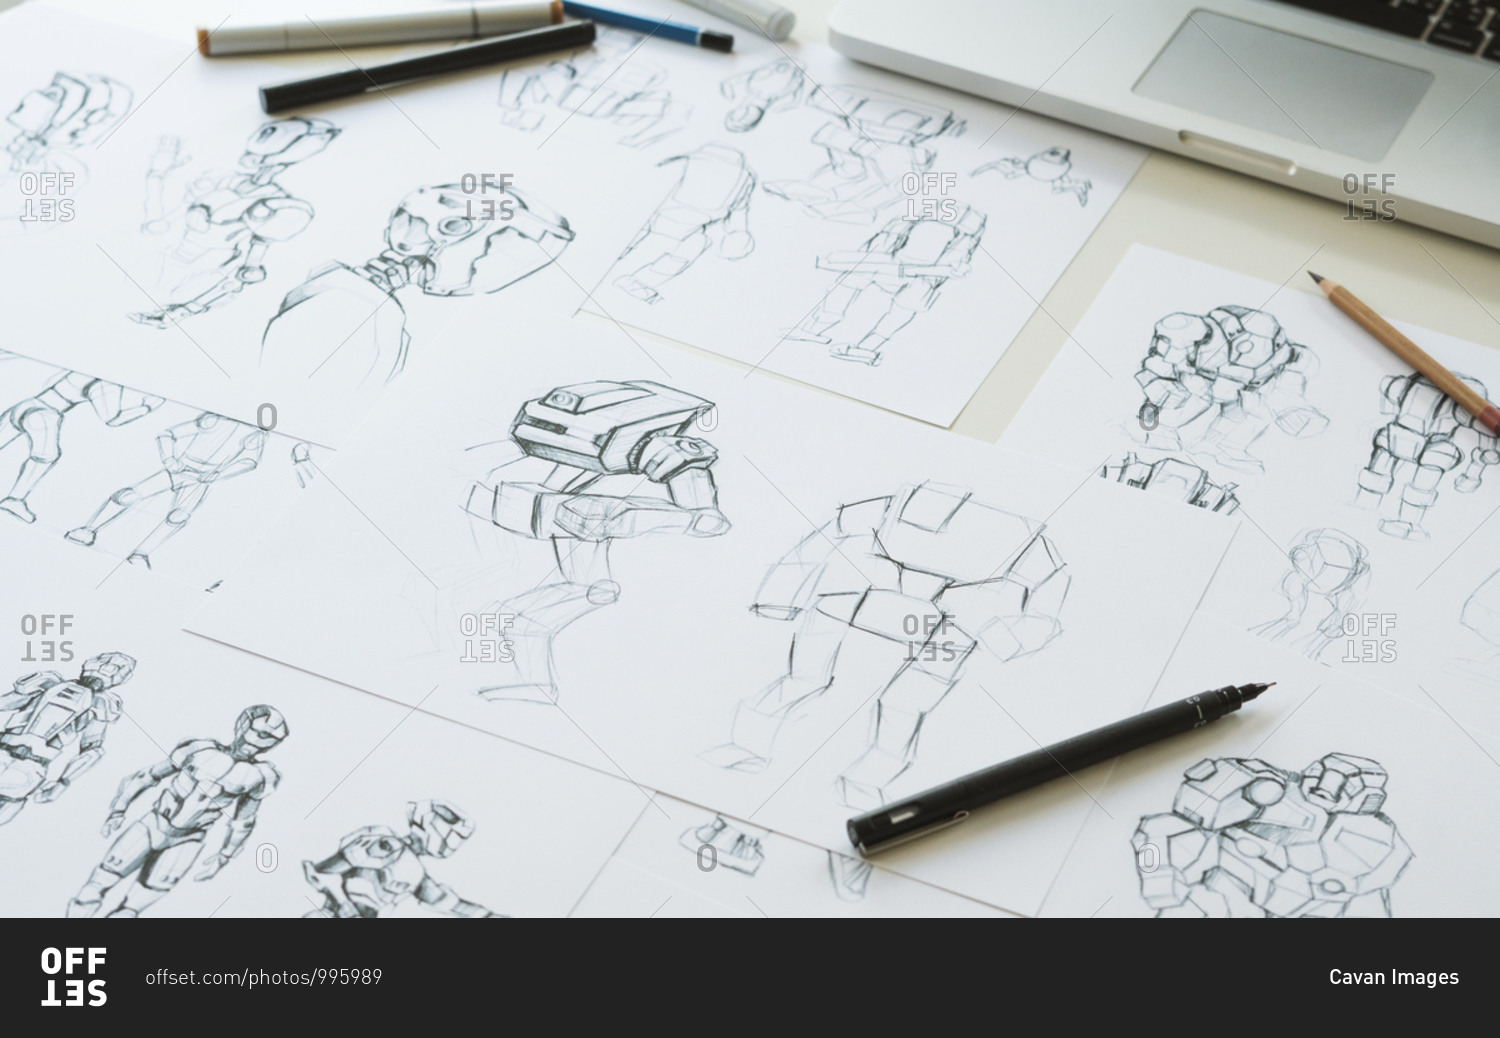 Animation character design video game film production